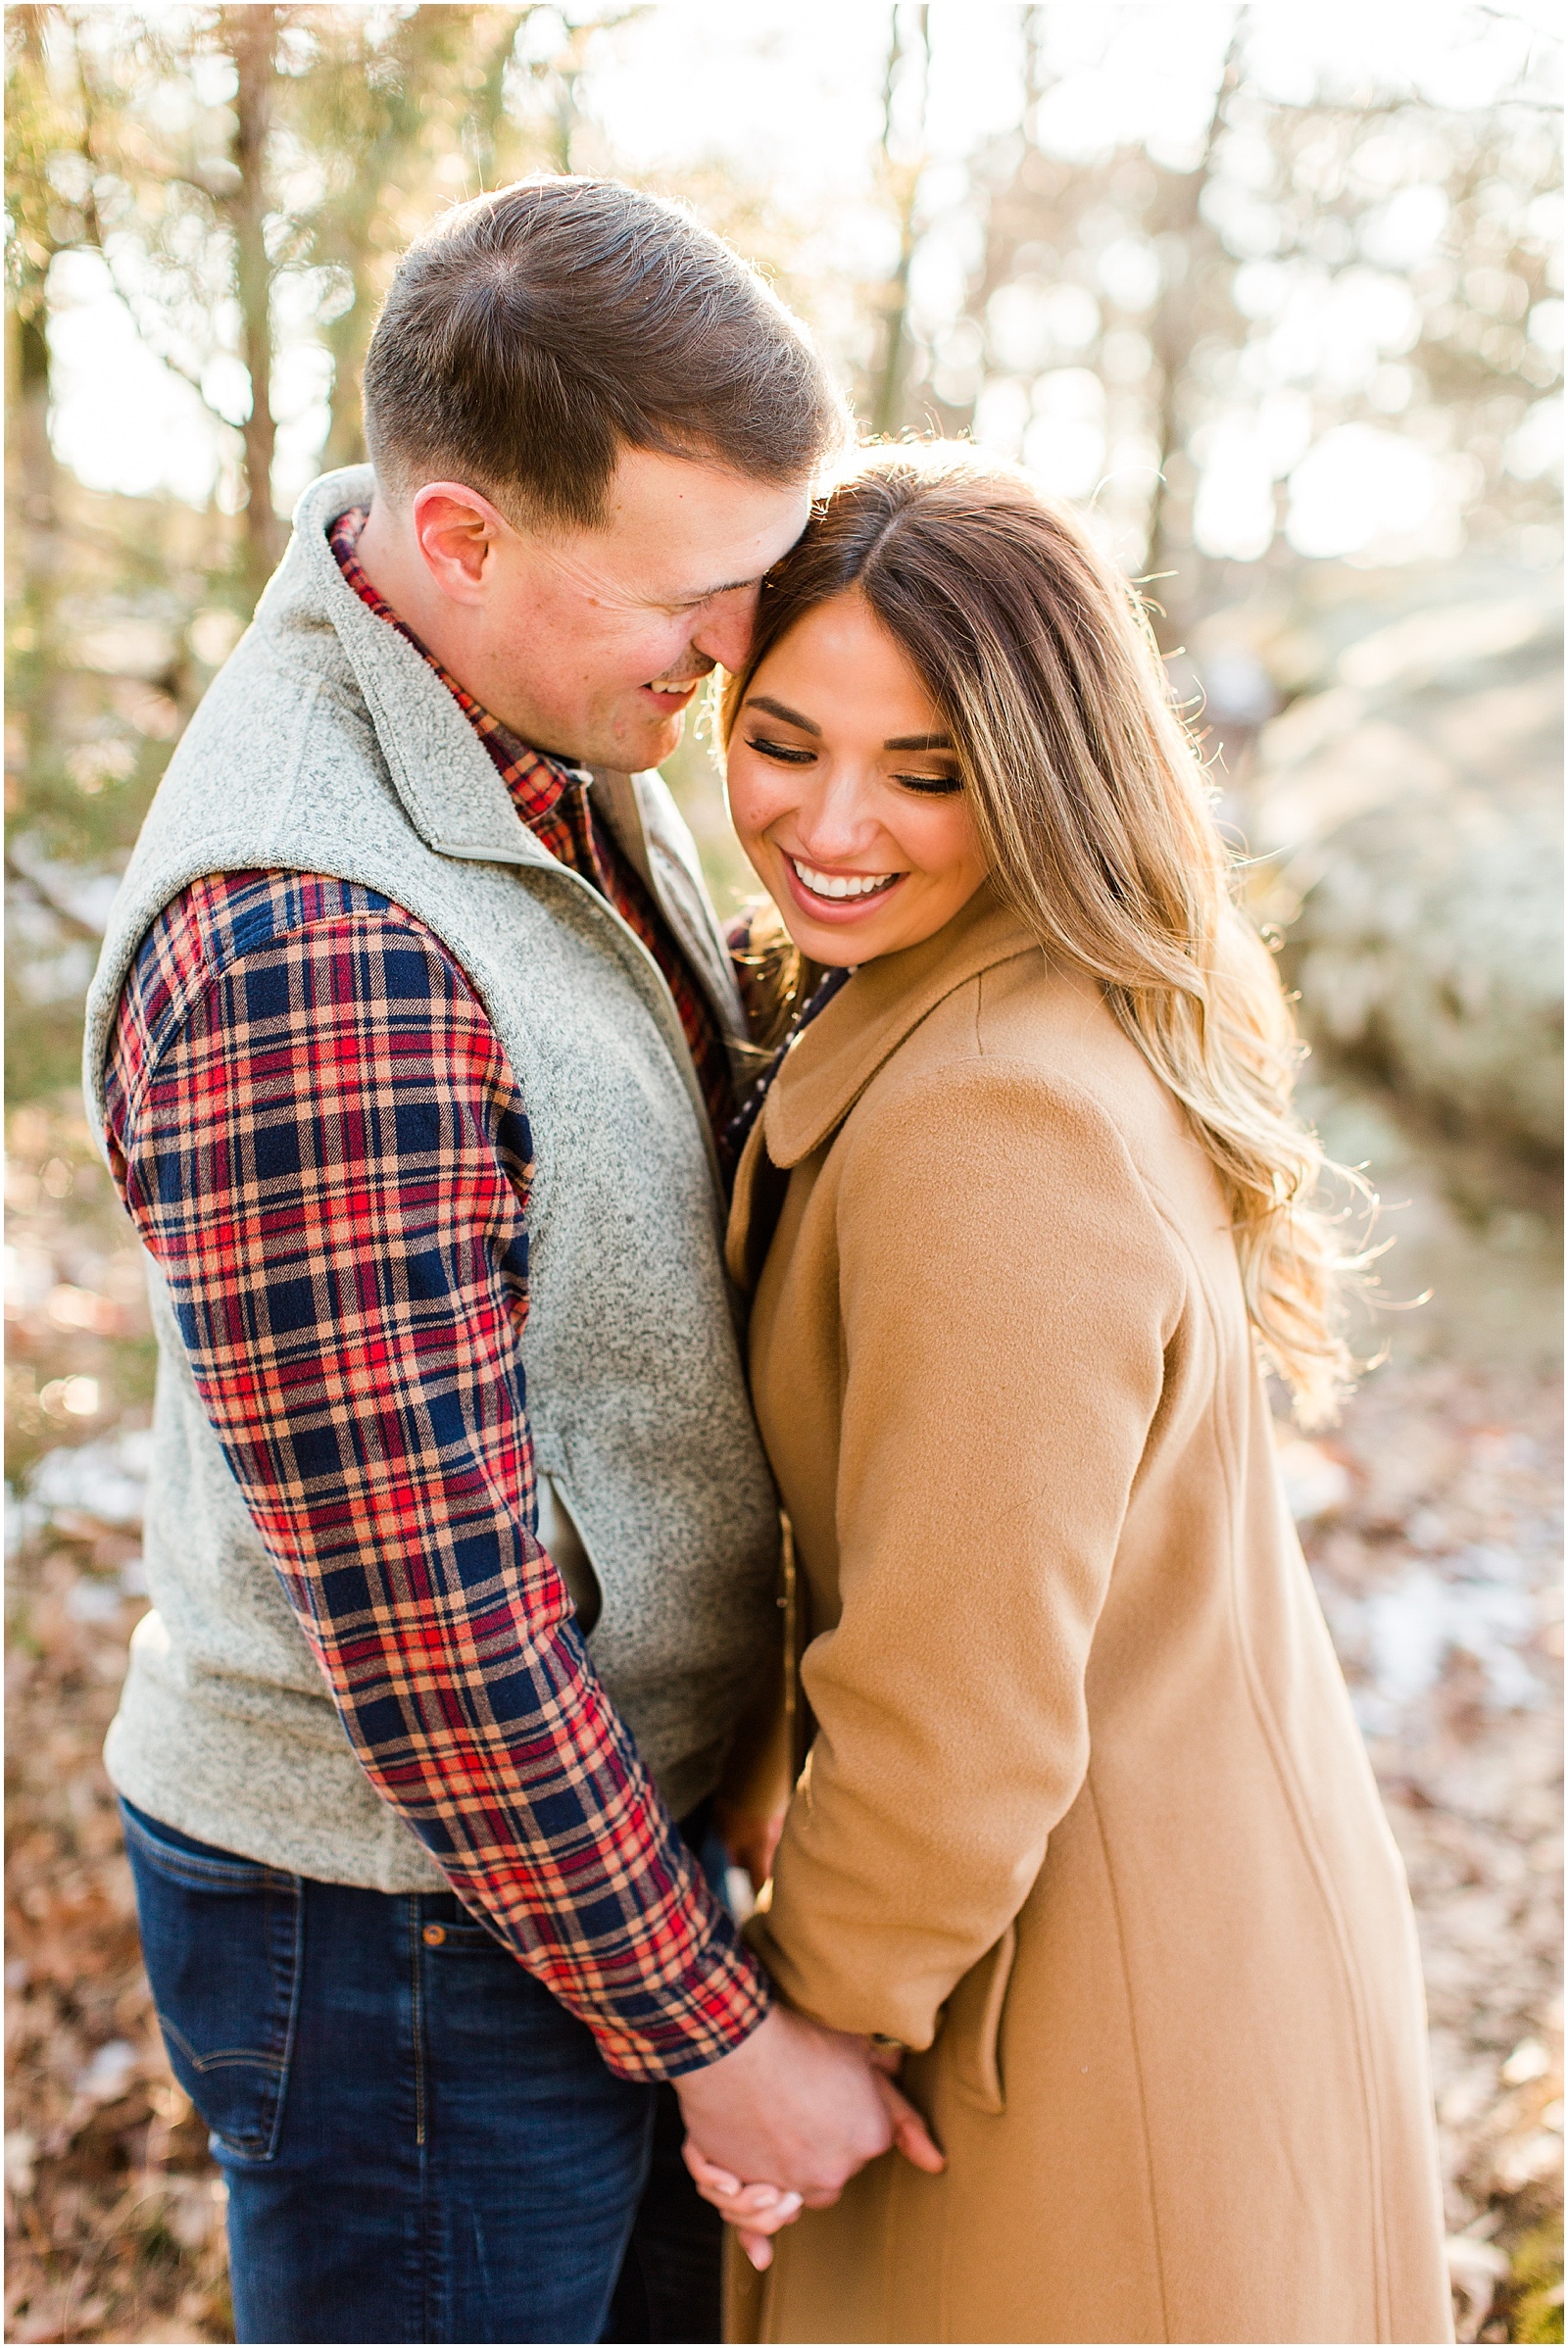 A Sunny Garden of the Gods Engagement Session | Shiloh and Lee | Bret and Brandie Photography030.jpg